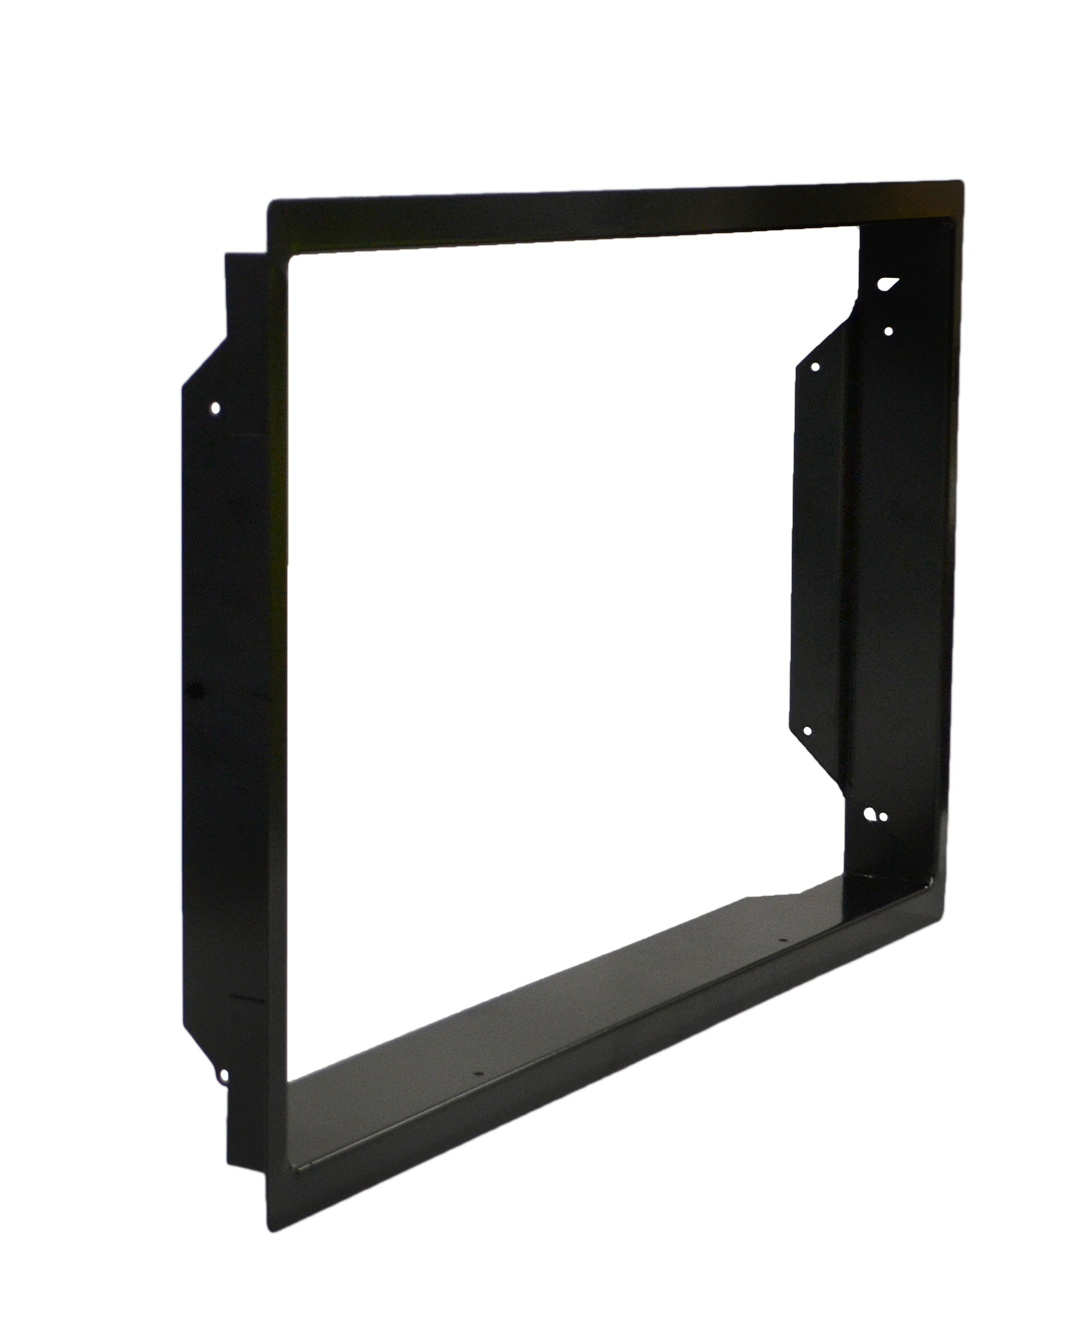 hidden-NCE Microwave Bracket (Suits 23L Flatbed Microwave)